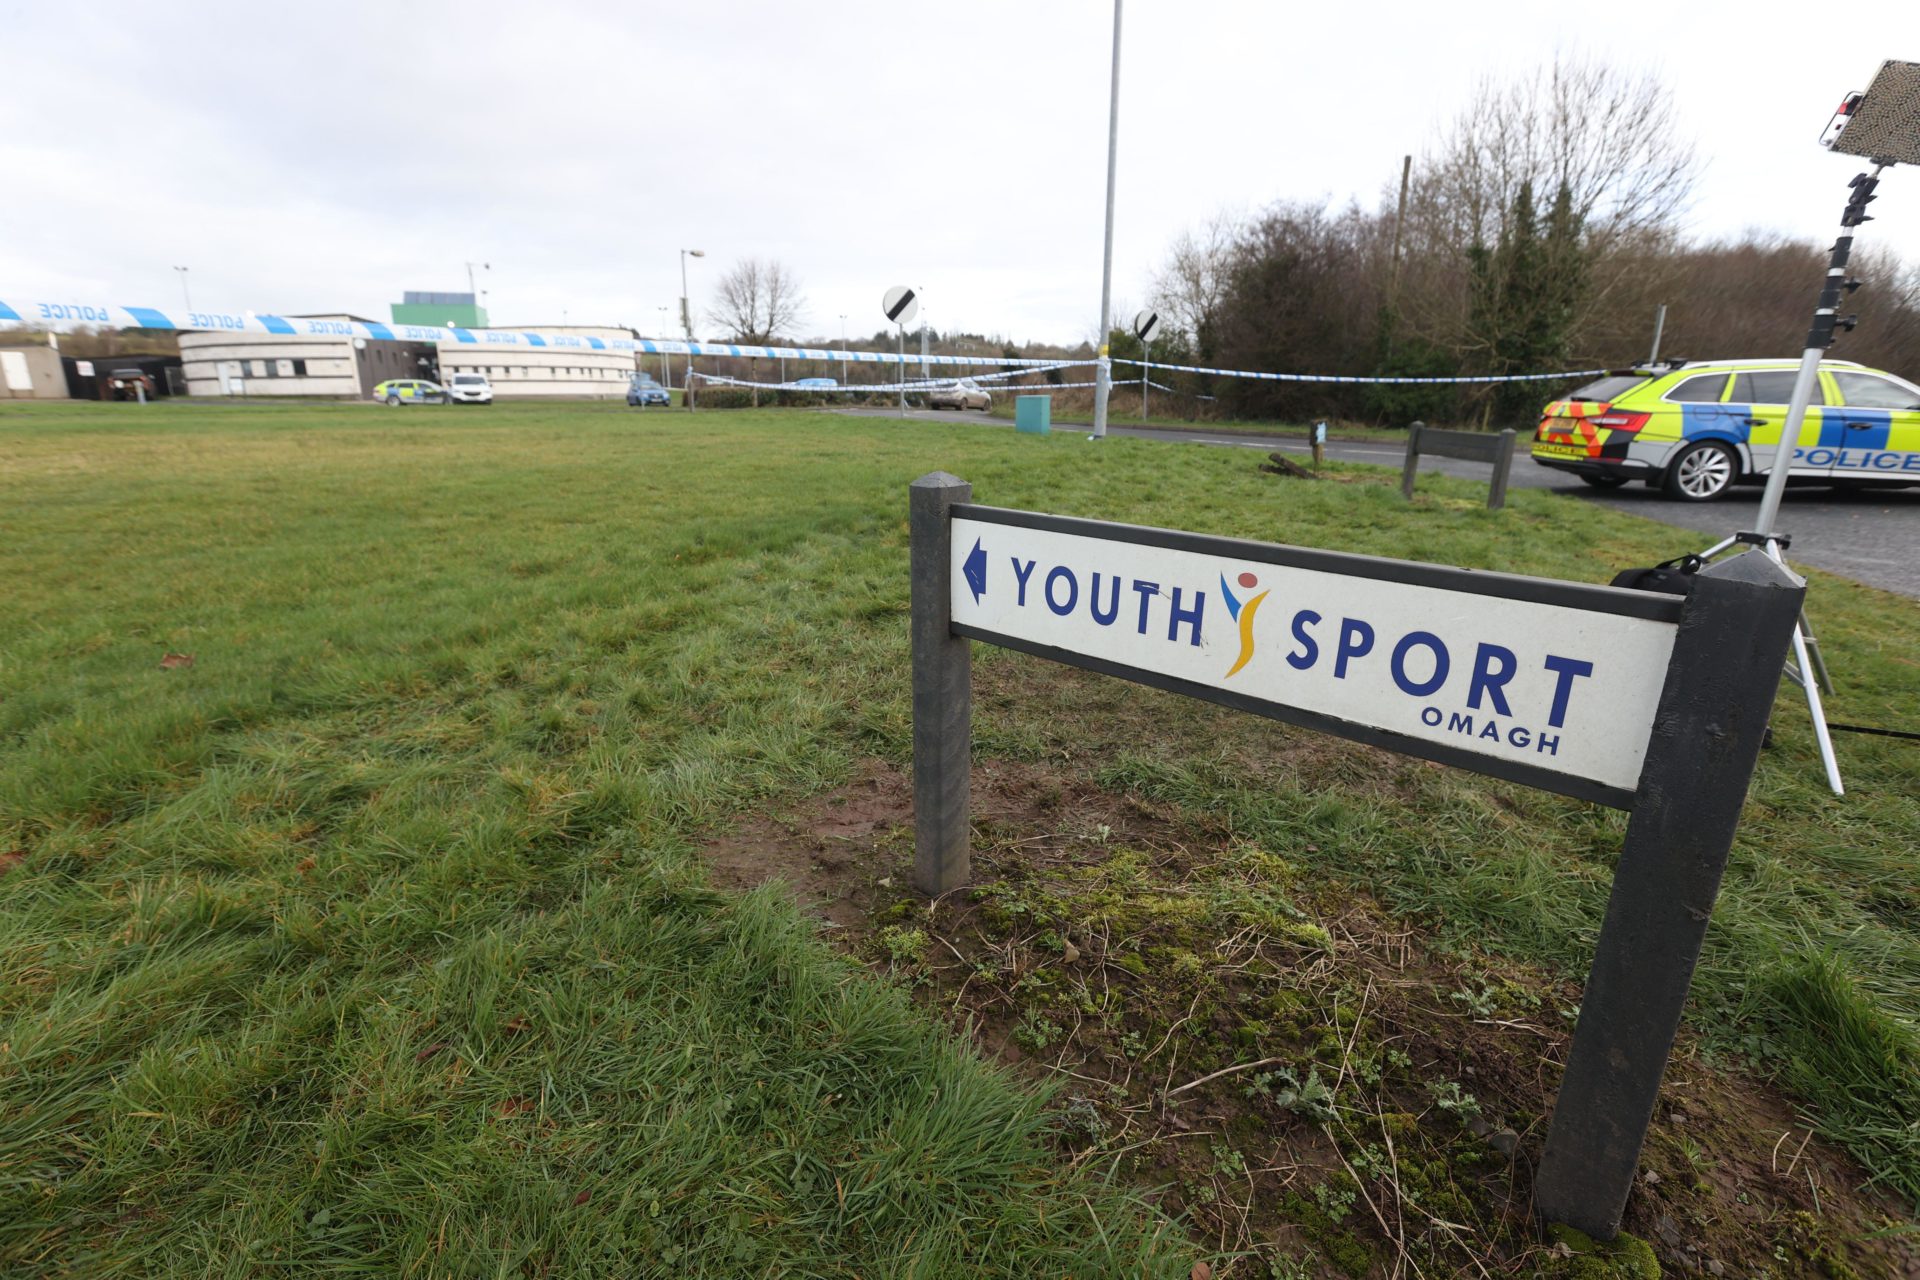 A sign for the Youth Sport Omagh sports complex in Co Tyrone, Northern Ireland where off-duty PSNI Detective Chief Inspector John Caldwell was shot a number of times by masked men